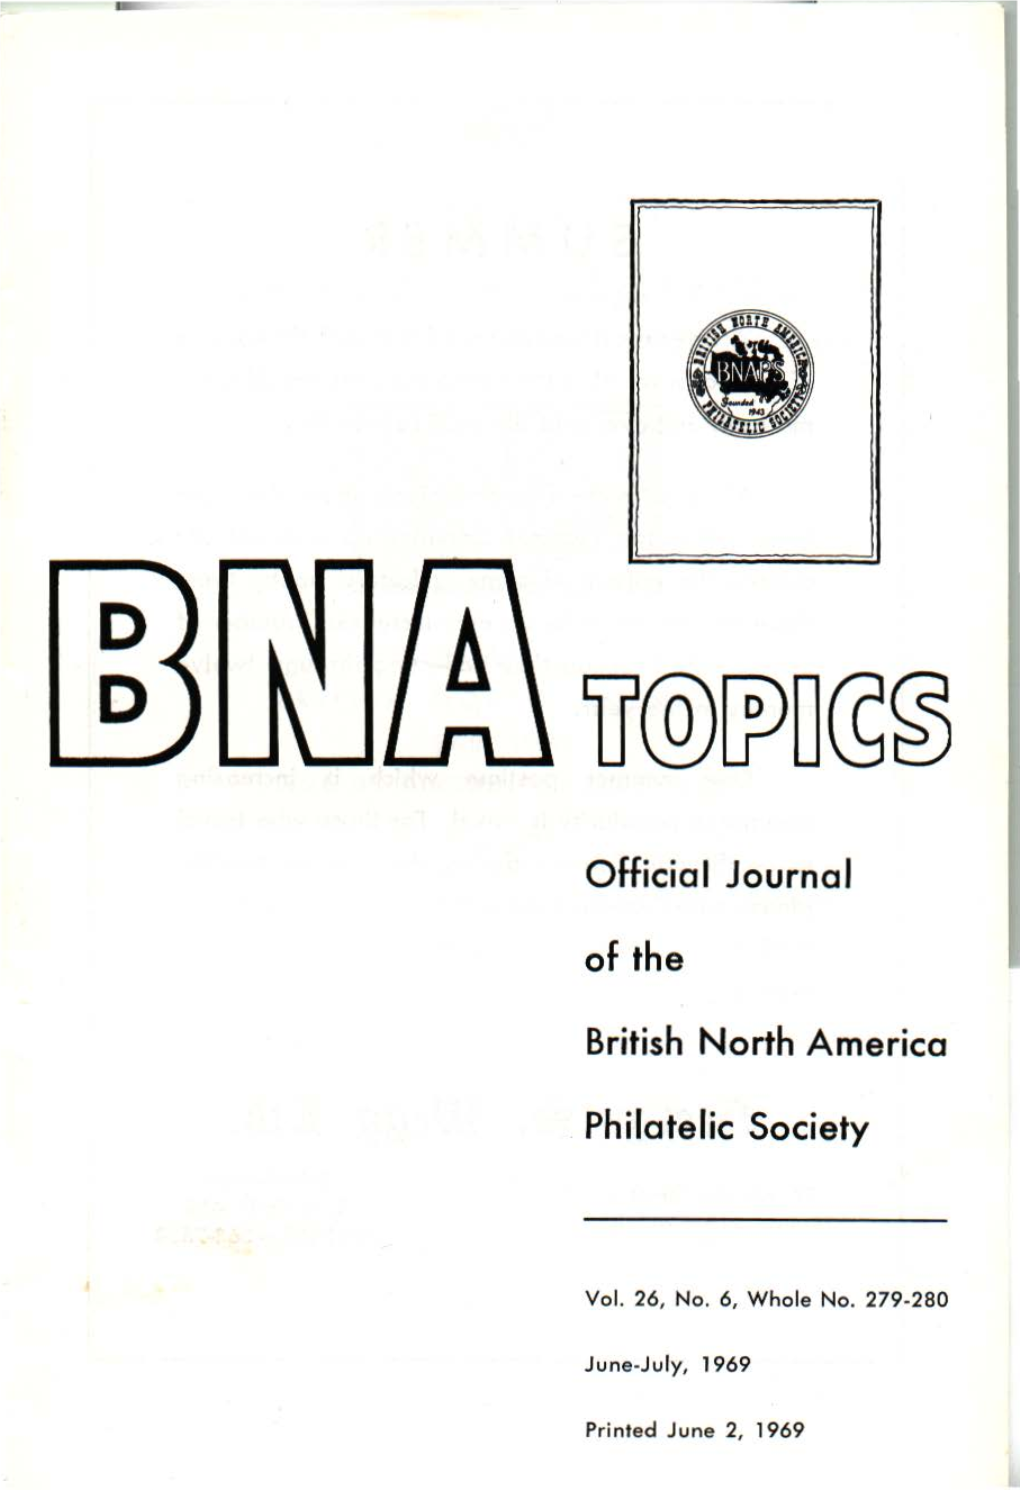 Official Journal of the British North America Philatelic Society